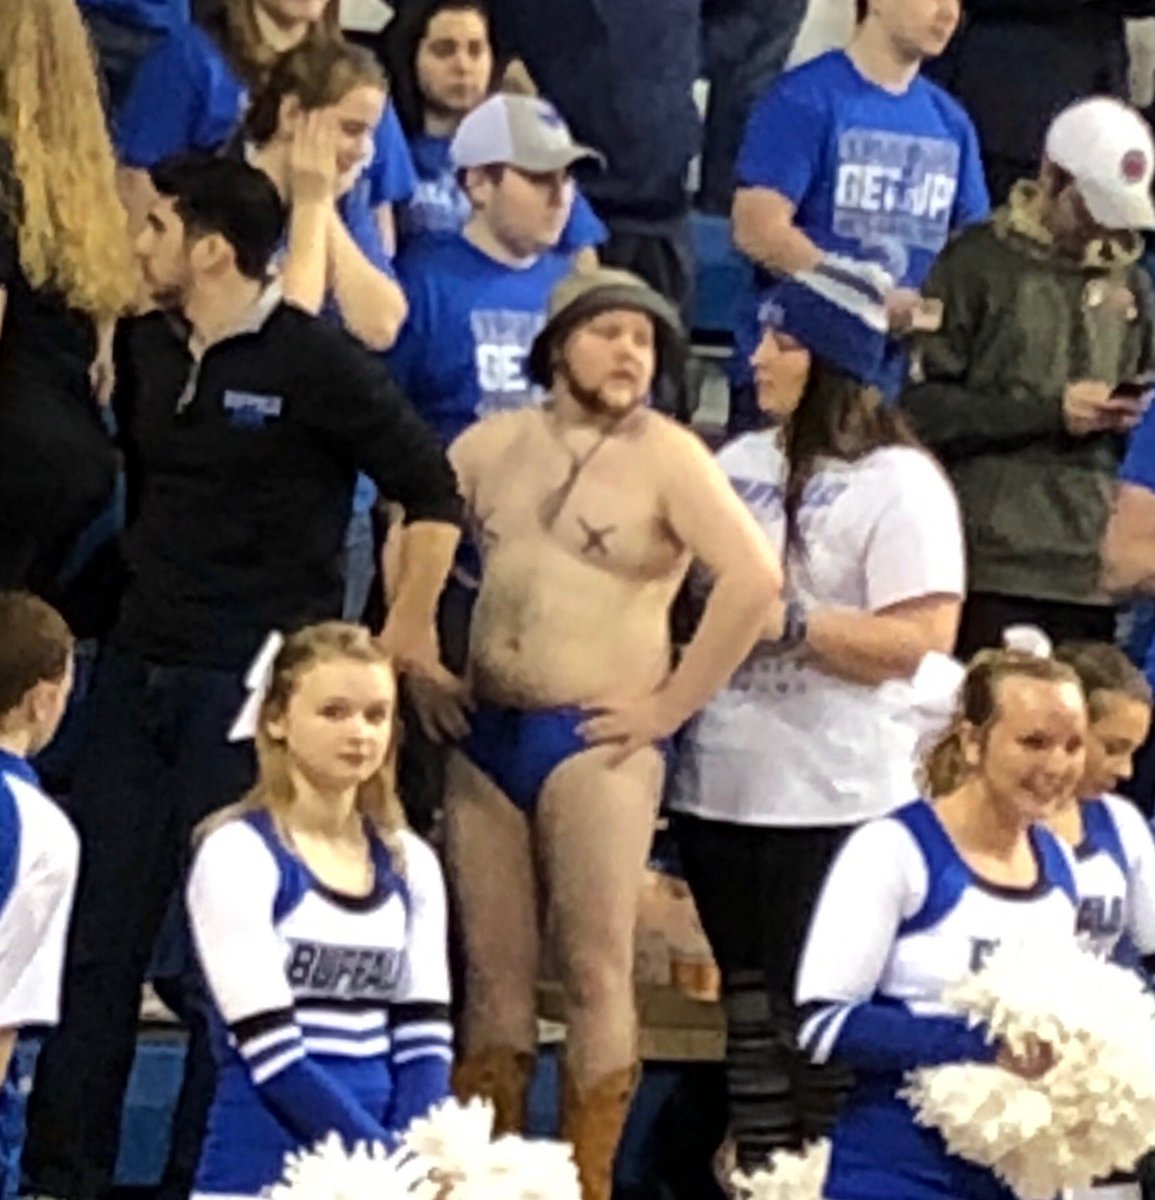 pastel Ondartet entanglement Jacquie Walker on Twitter: "With #UB Naked Guy here in his Speedo... you  know it's going to be a great game! @UBwomenshoops #UBhornsUP #lasthomegame  https://t.co/DiH3bPfz2q" / Twitter